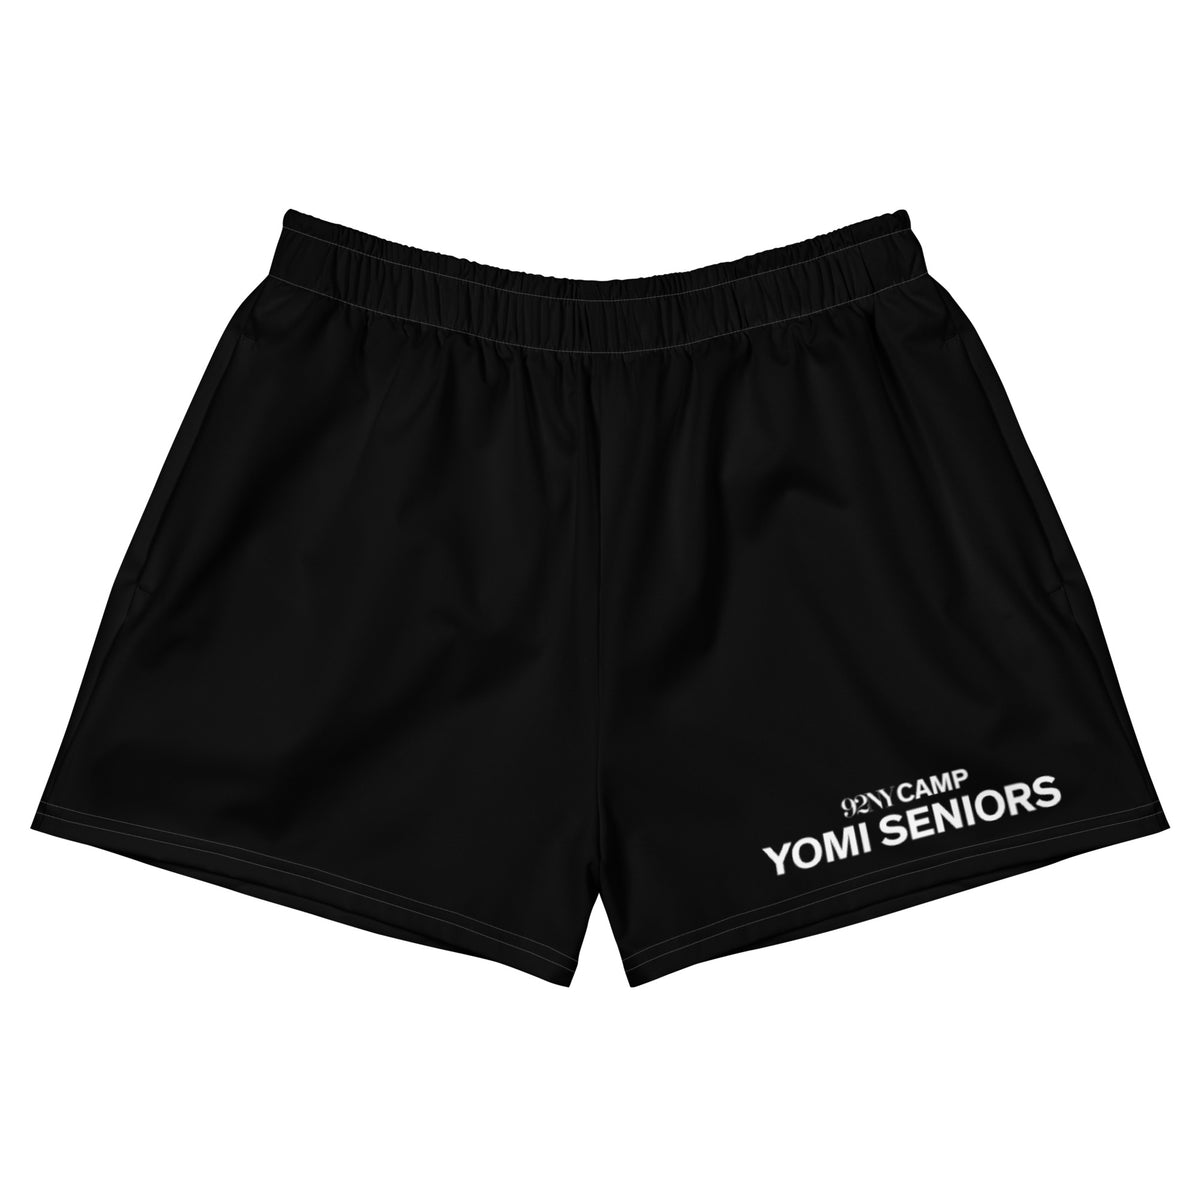 92nd St Fitted Athletic Black Shorts - Yomi Seniors – Pack for Camp